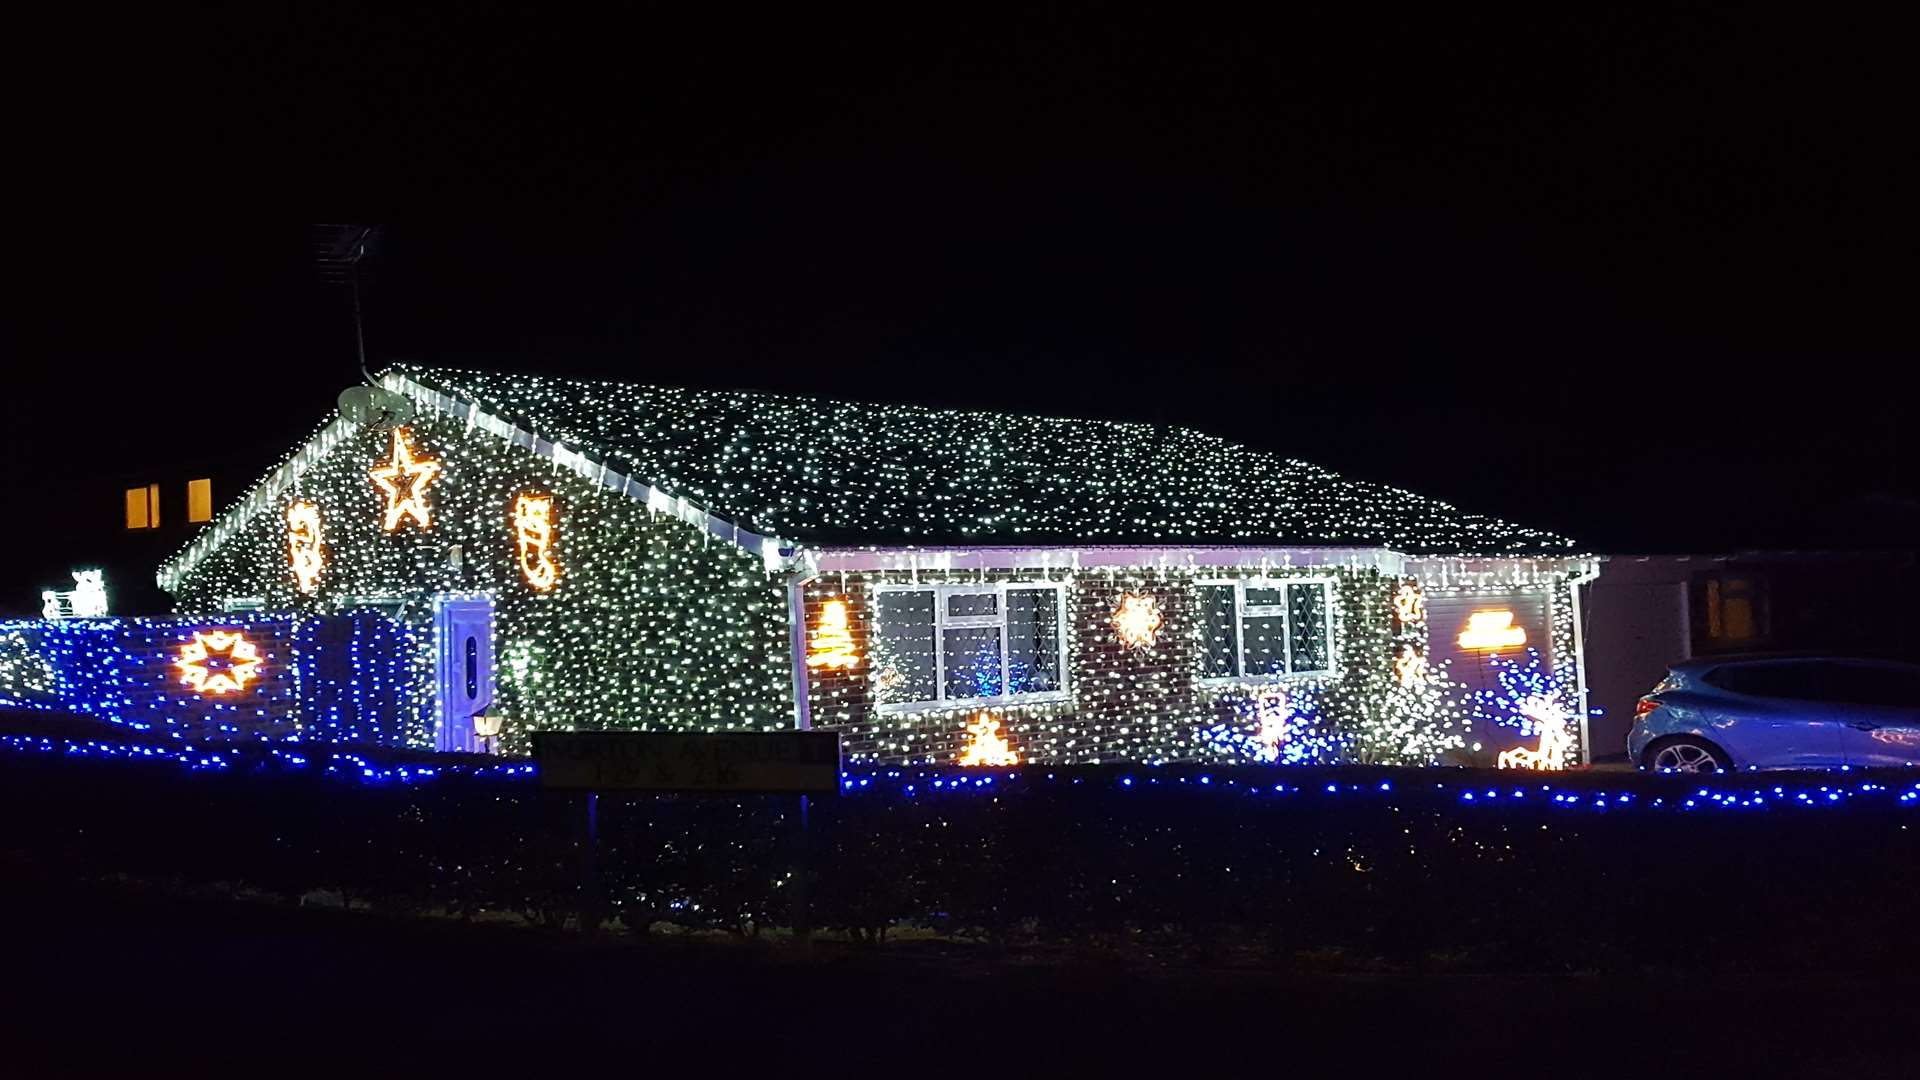 The bungalow is completely covered with Christmas lights